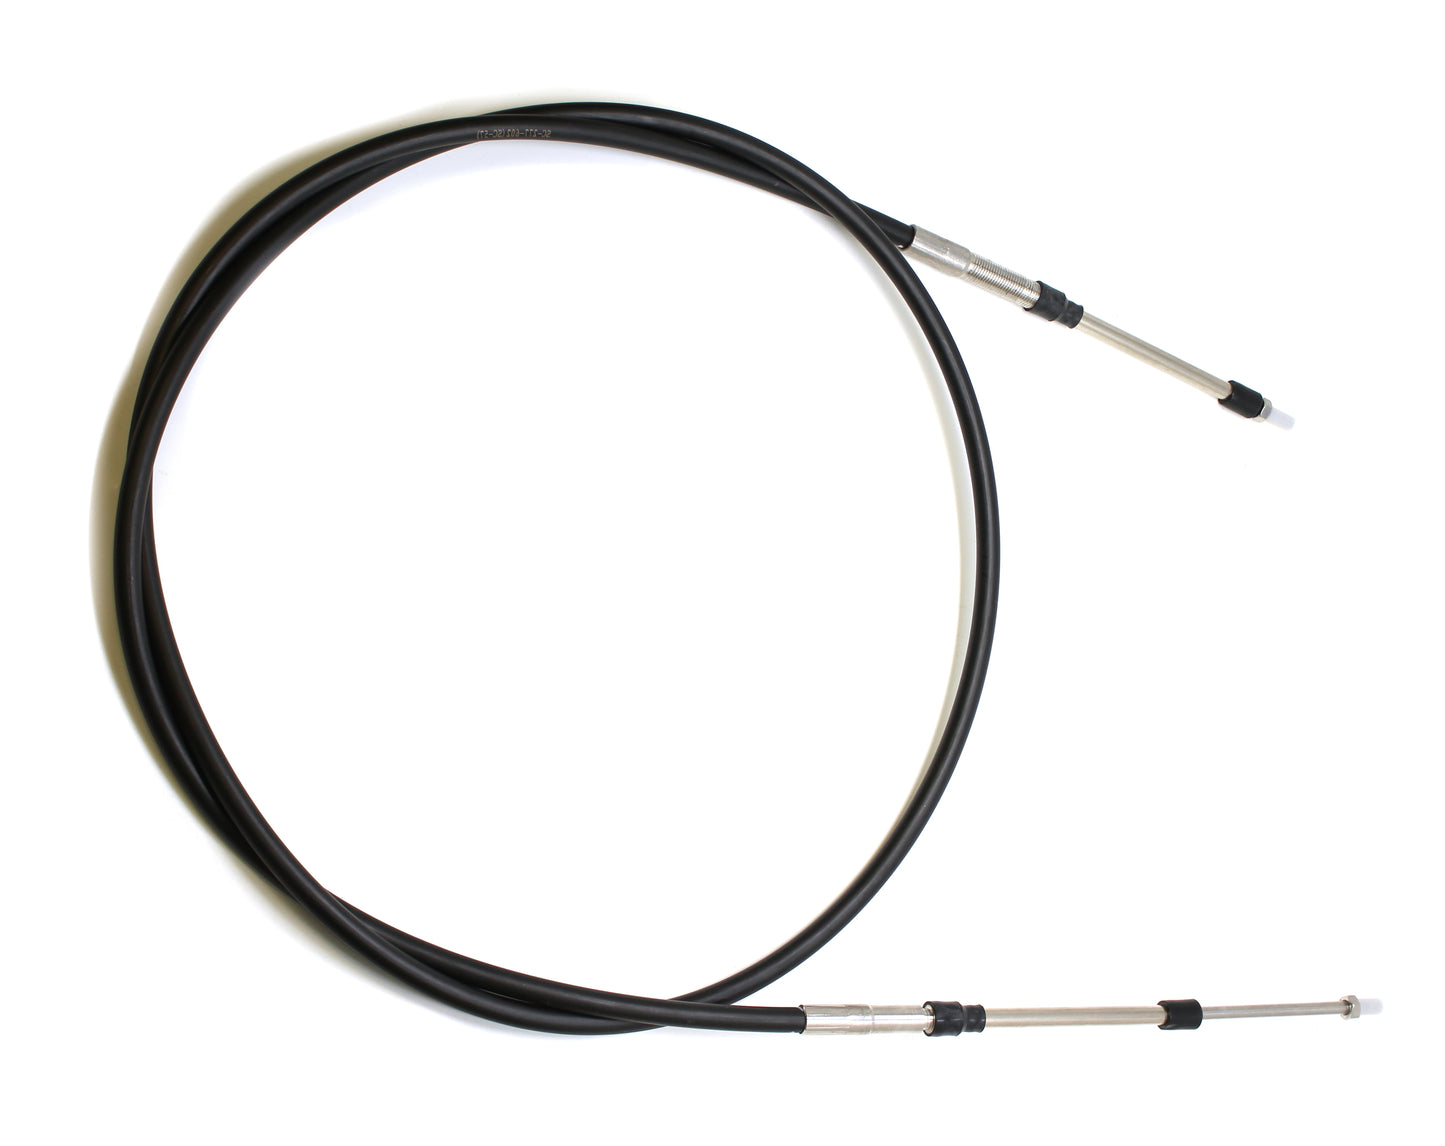 Aftermarket Steering Cable Replacement for SeaDoo OEM # 277001602/SBT #26-3121 JSP Brand